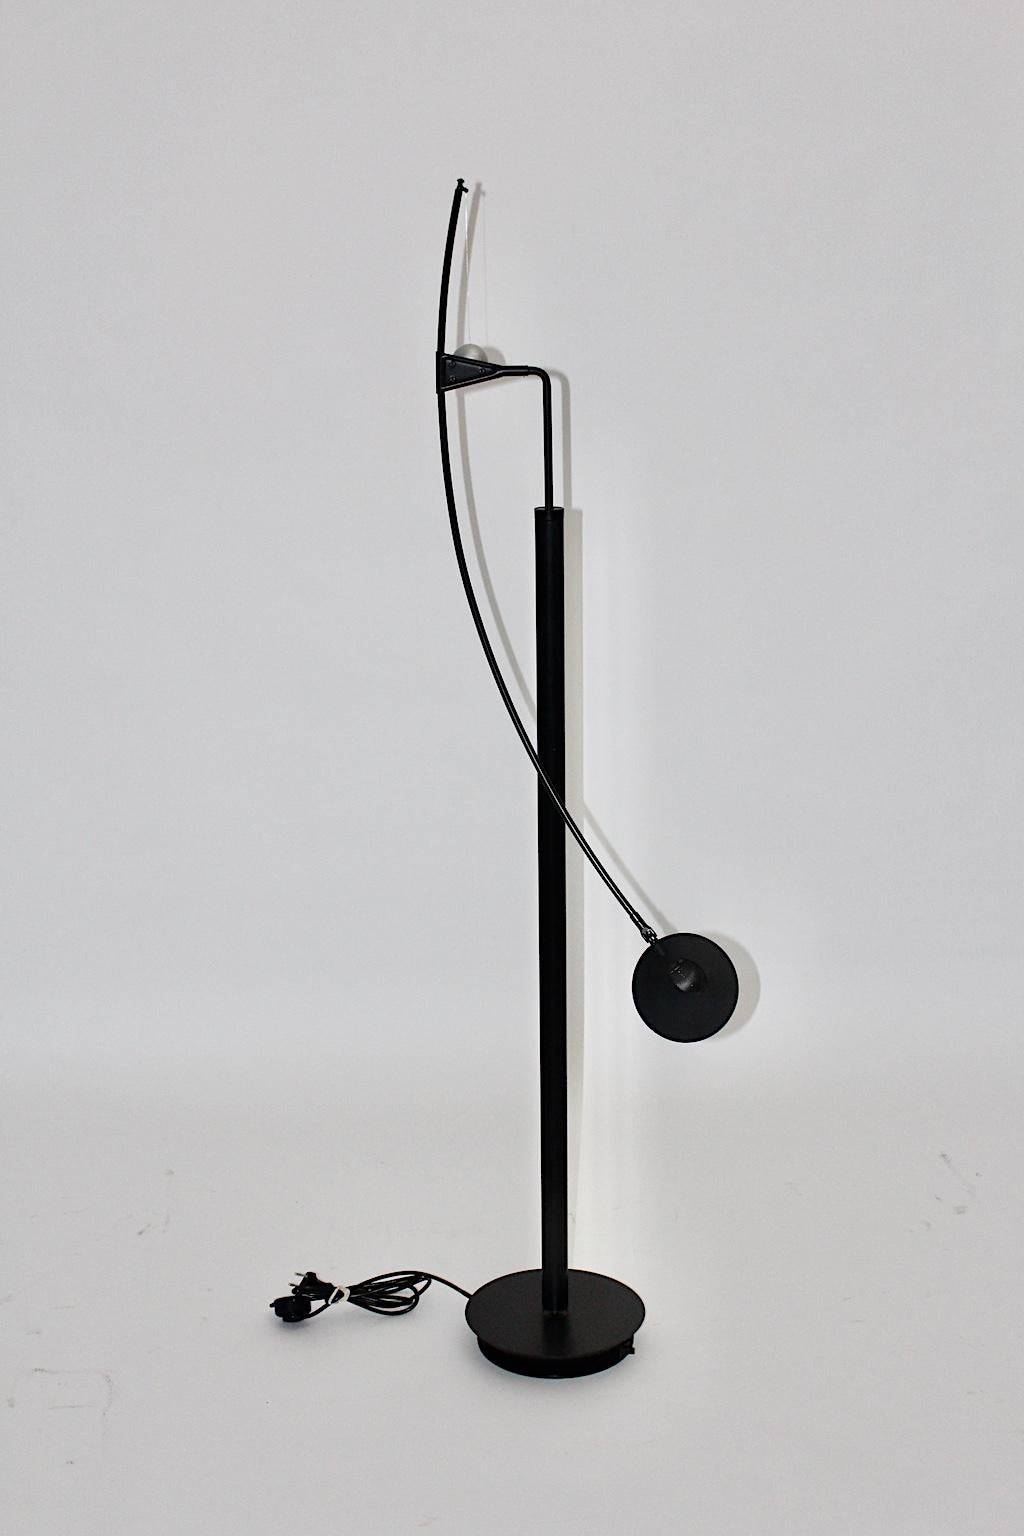 Postmodern Vintage Black Floor Lamp by Carlo Forcolini 1989 for Artemide Italy For Sale 3